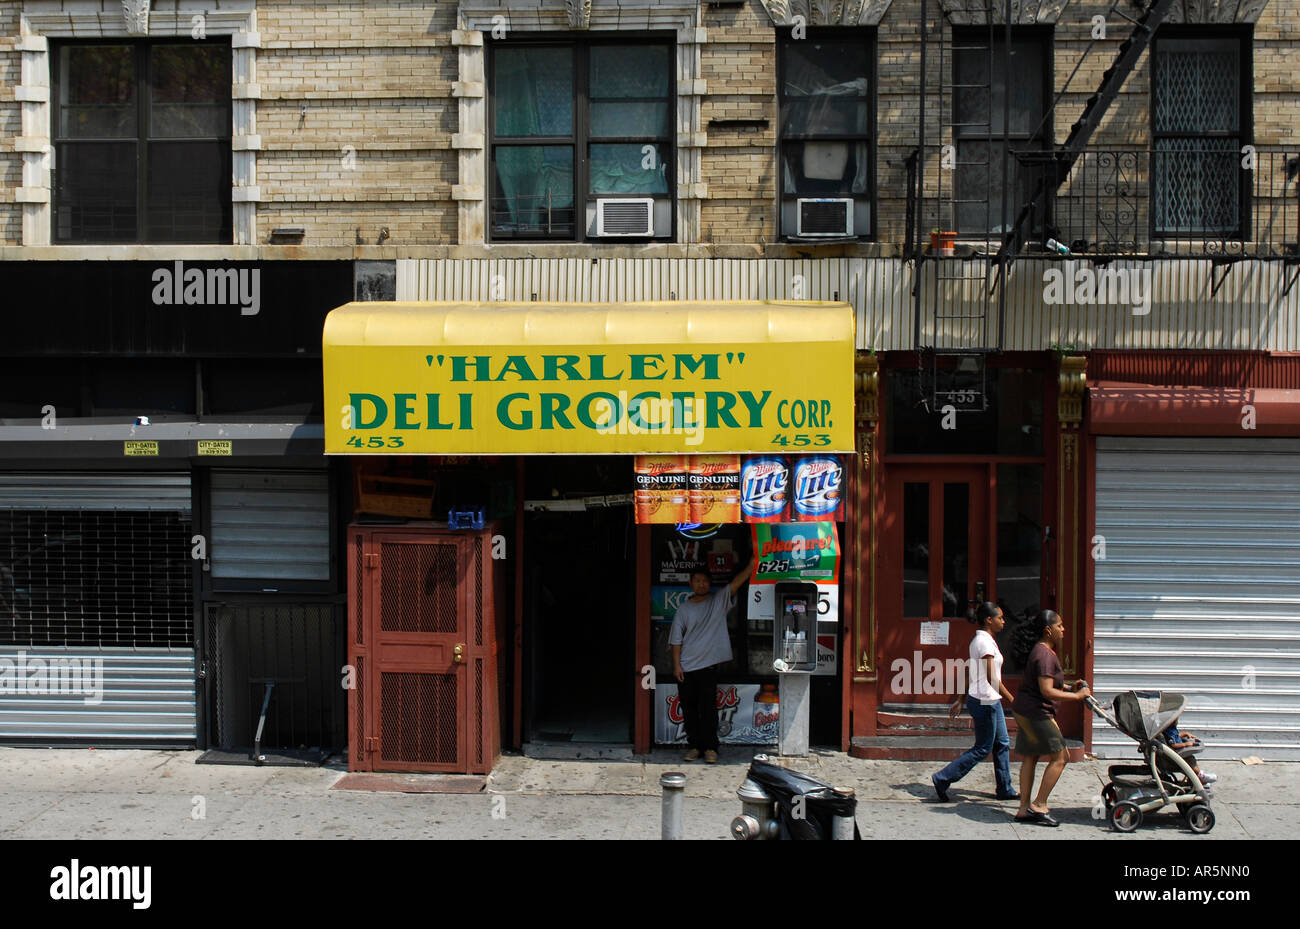 Two afro american girls with pushchair stroller walk past Harlem Deli Grocery Harlem New York Stock Photo